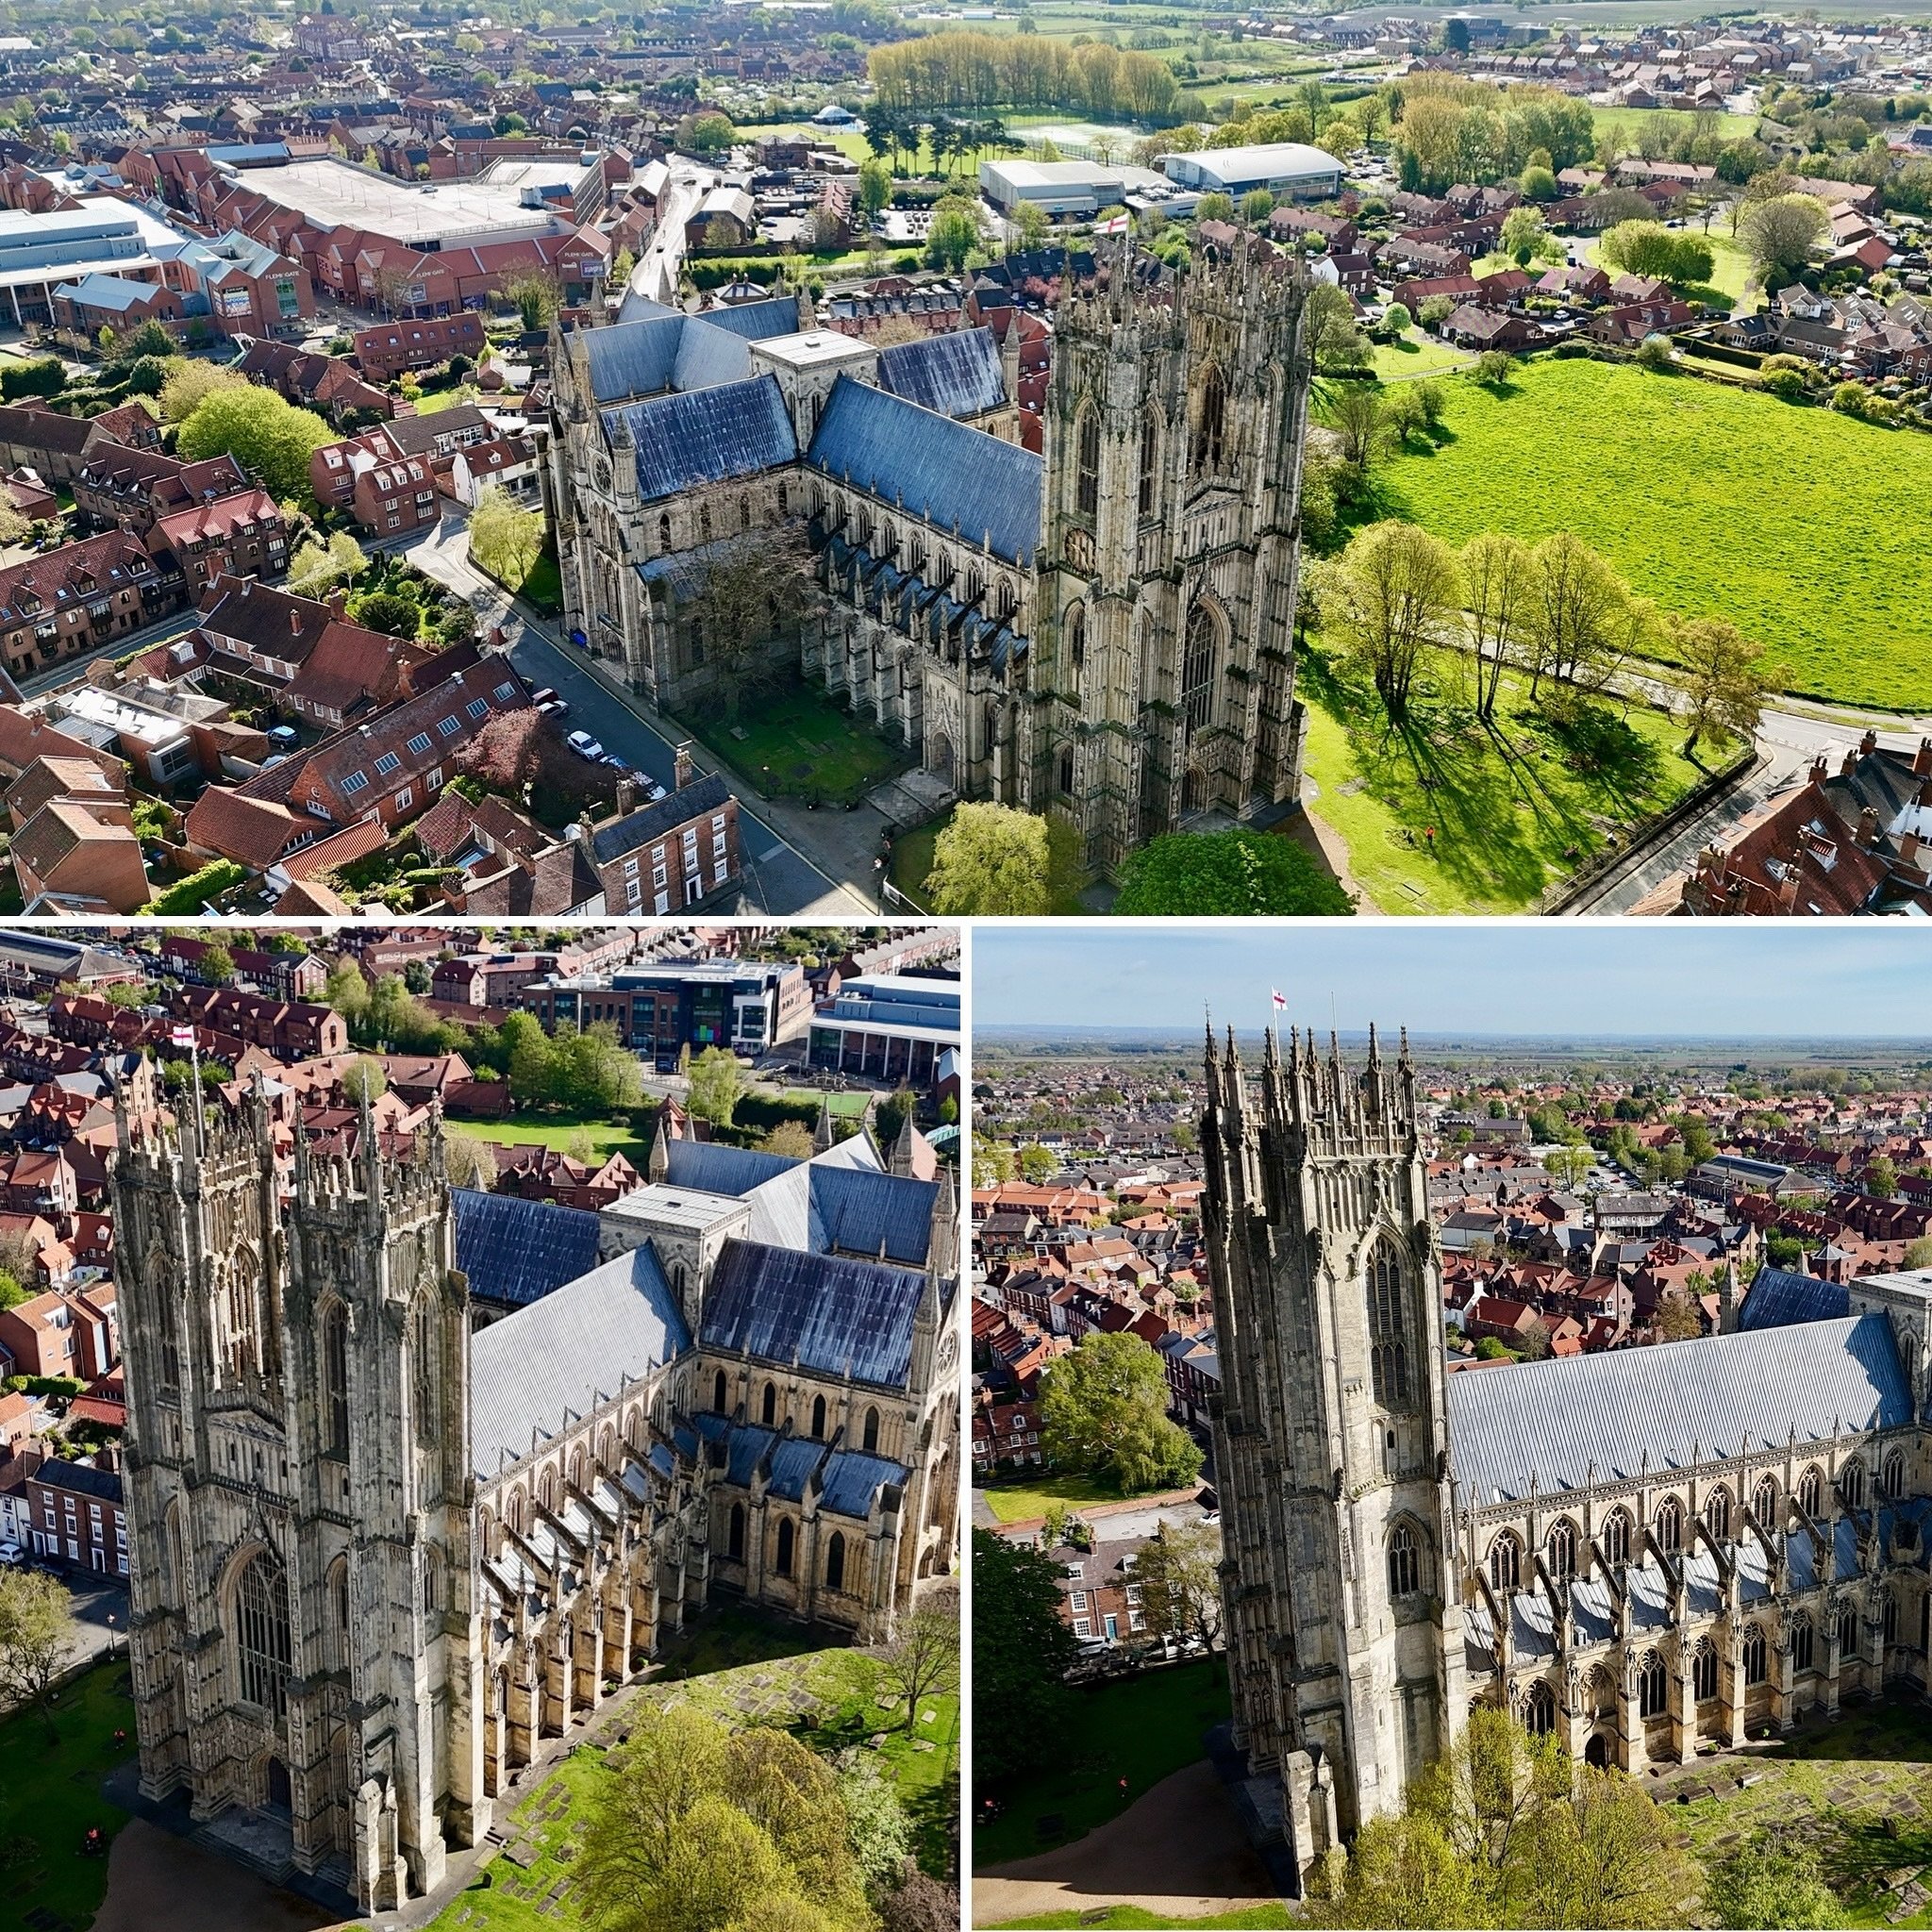 Beverley Minster, in Beverley, East Riding of Yorkshire, looking stunning today whilst filming 🎥🎬

#thedroneman  #kurniaaerialphotography #DroneProduction #AerialProduction #DroneVideography #AerialFilming #DroneFilming  #DroneServices #DroneAdvert